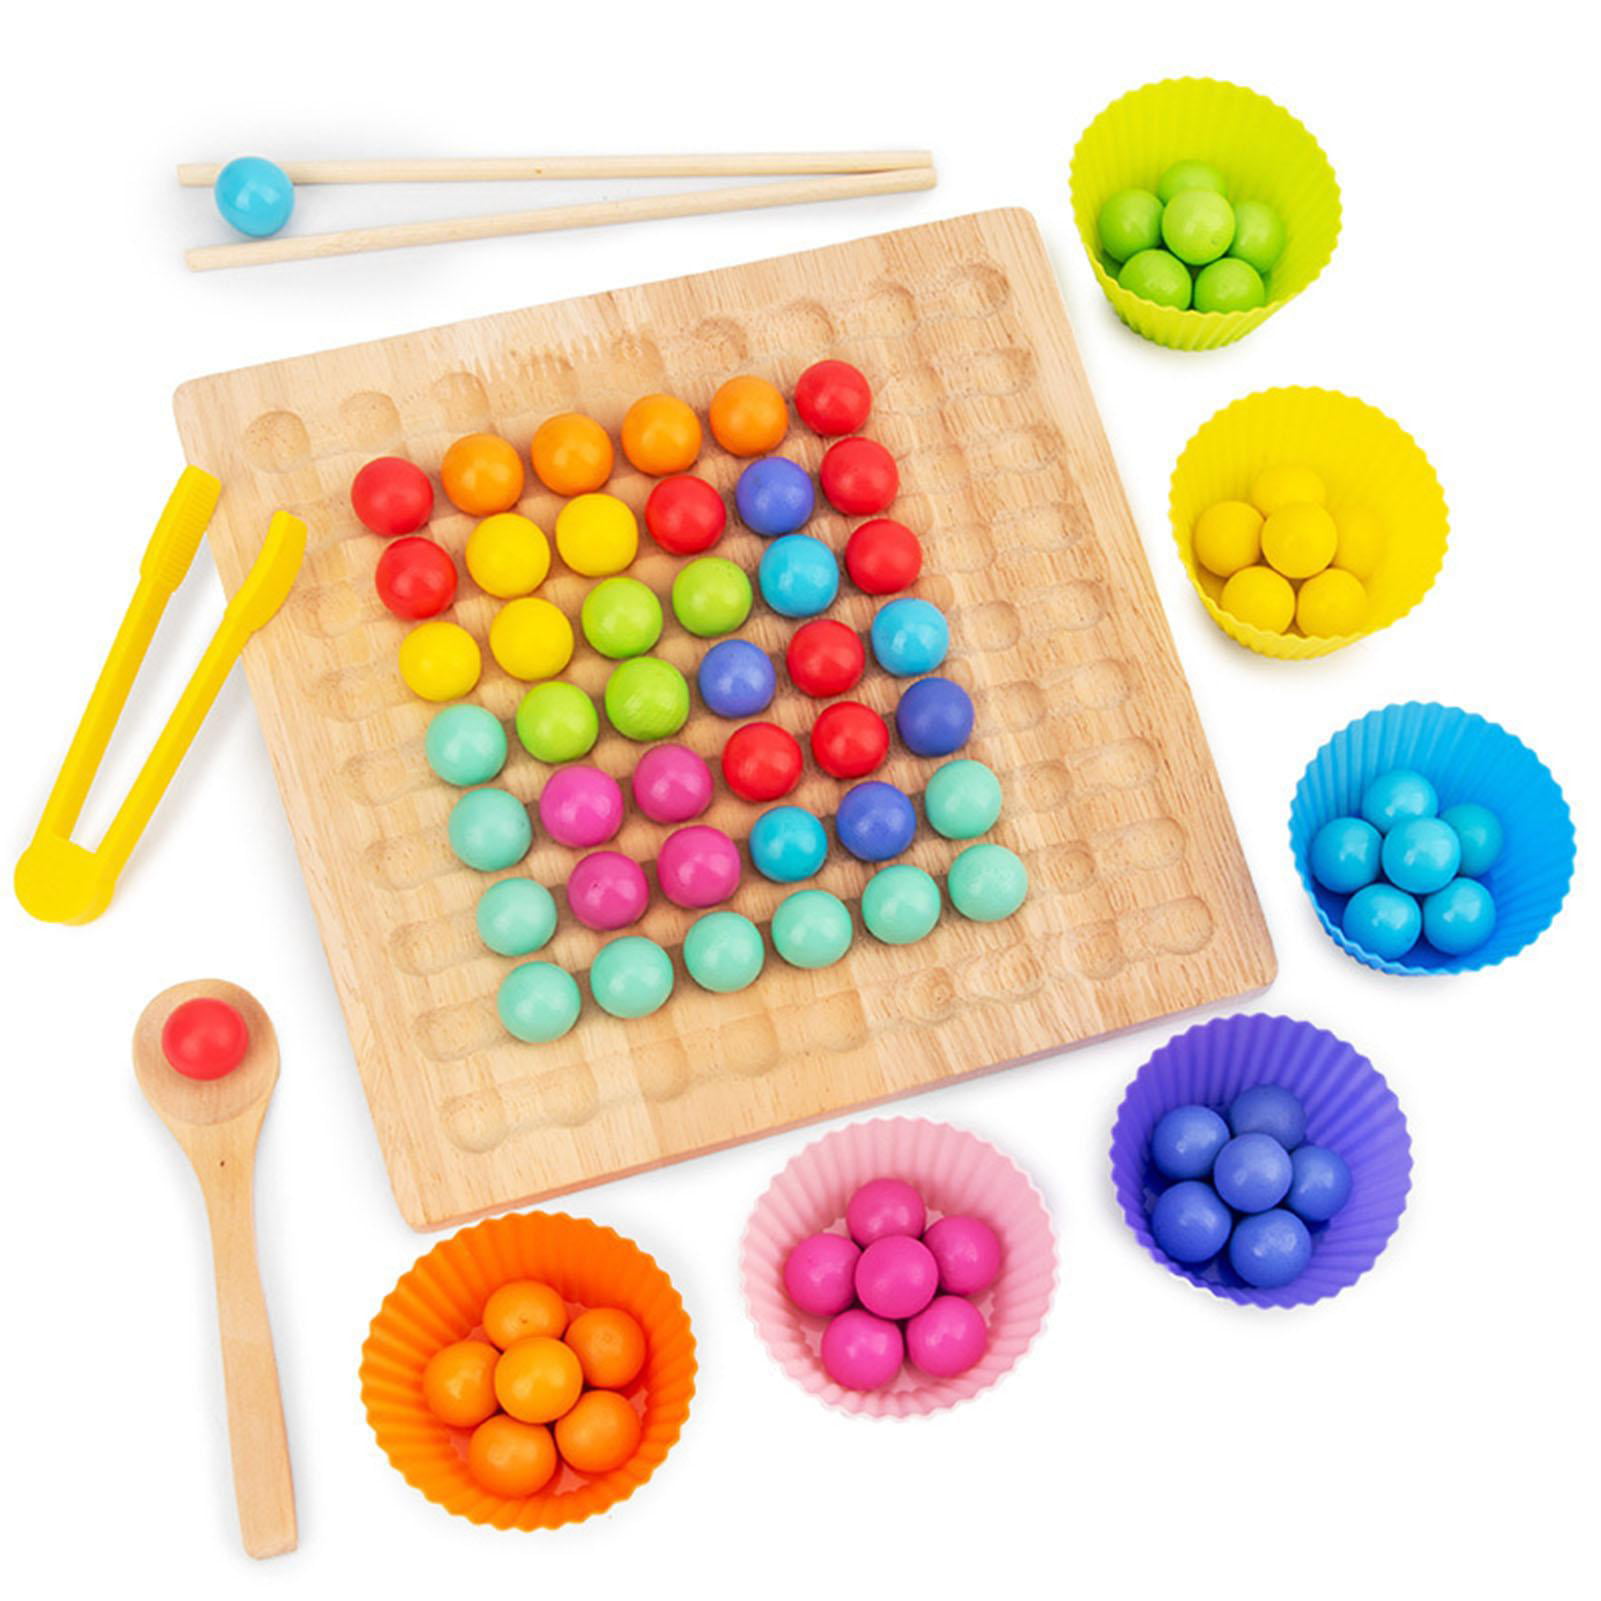 Details about   Wooden Rainbow Montessori Learning Educational Game Early Educational Toys 